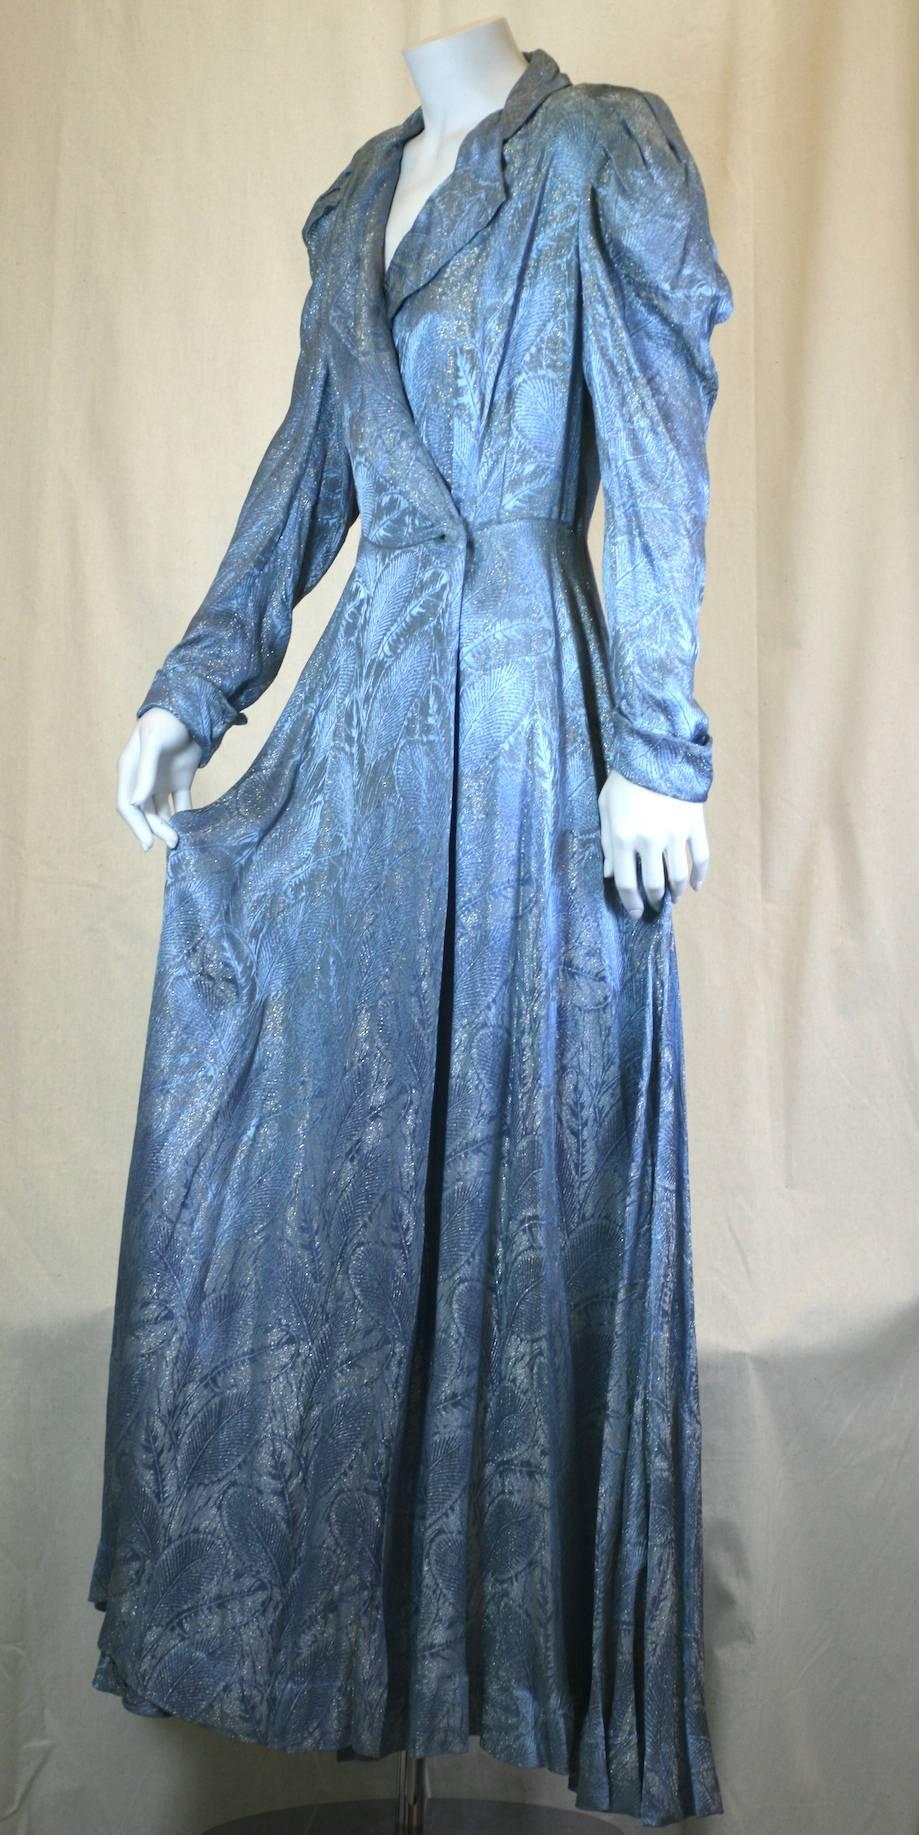 Art Deco Silver and Blue Lame Wrap Gown, originally destined for the boudoir, but, works wonderfully as an evening coat. Made from silky metallic French lame, this Hollywood styled topper, has a beautiful silvery leaf pattern embedded onto an aqua